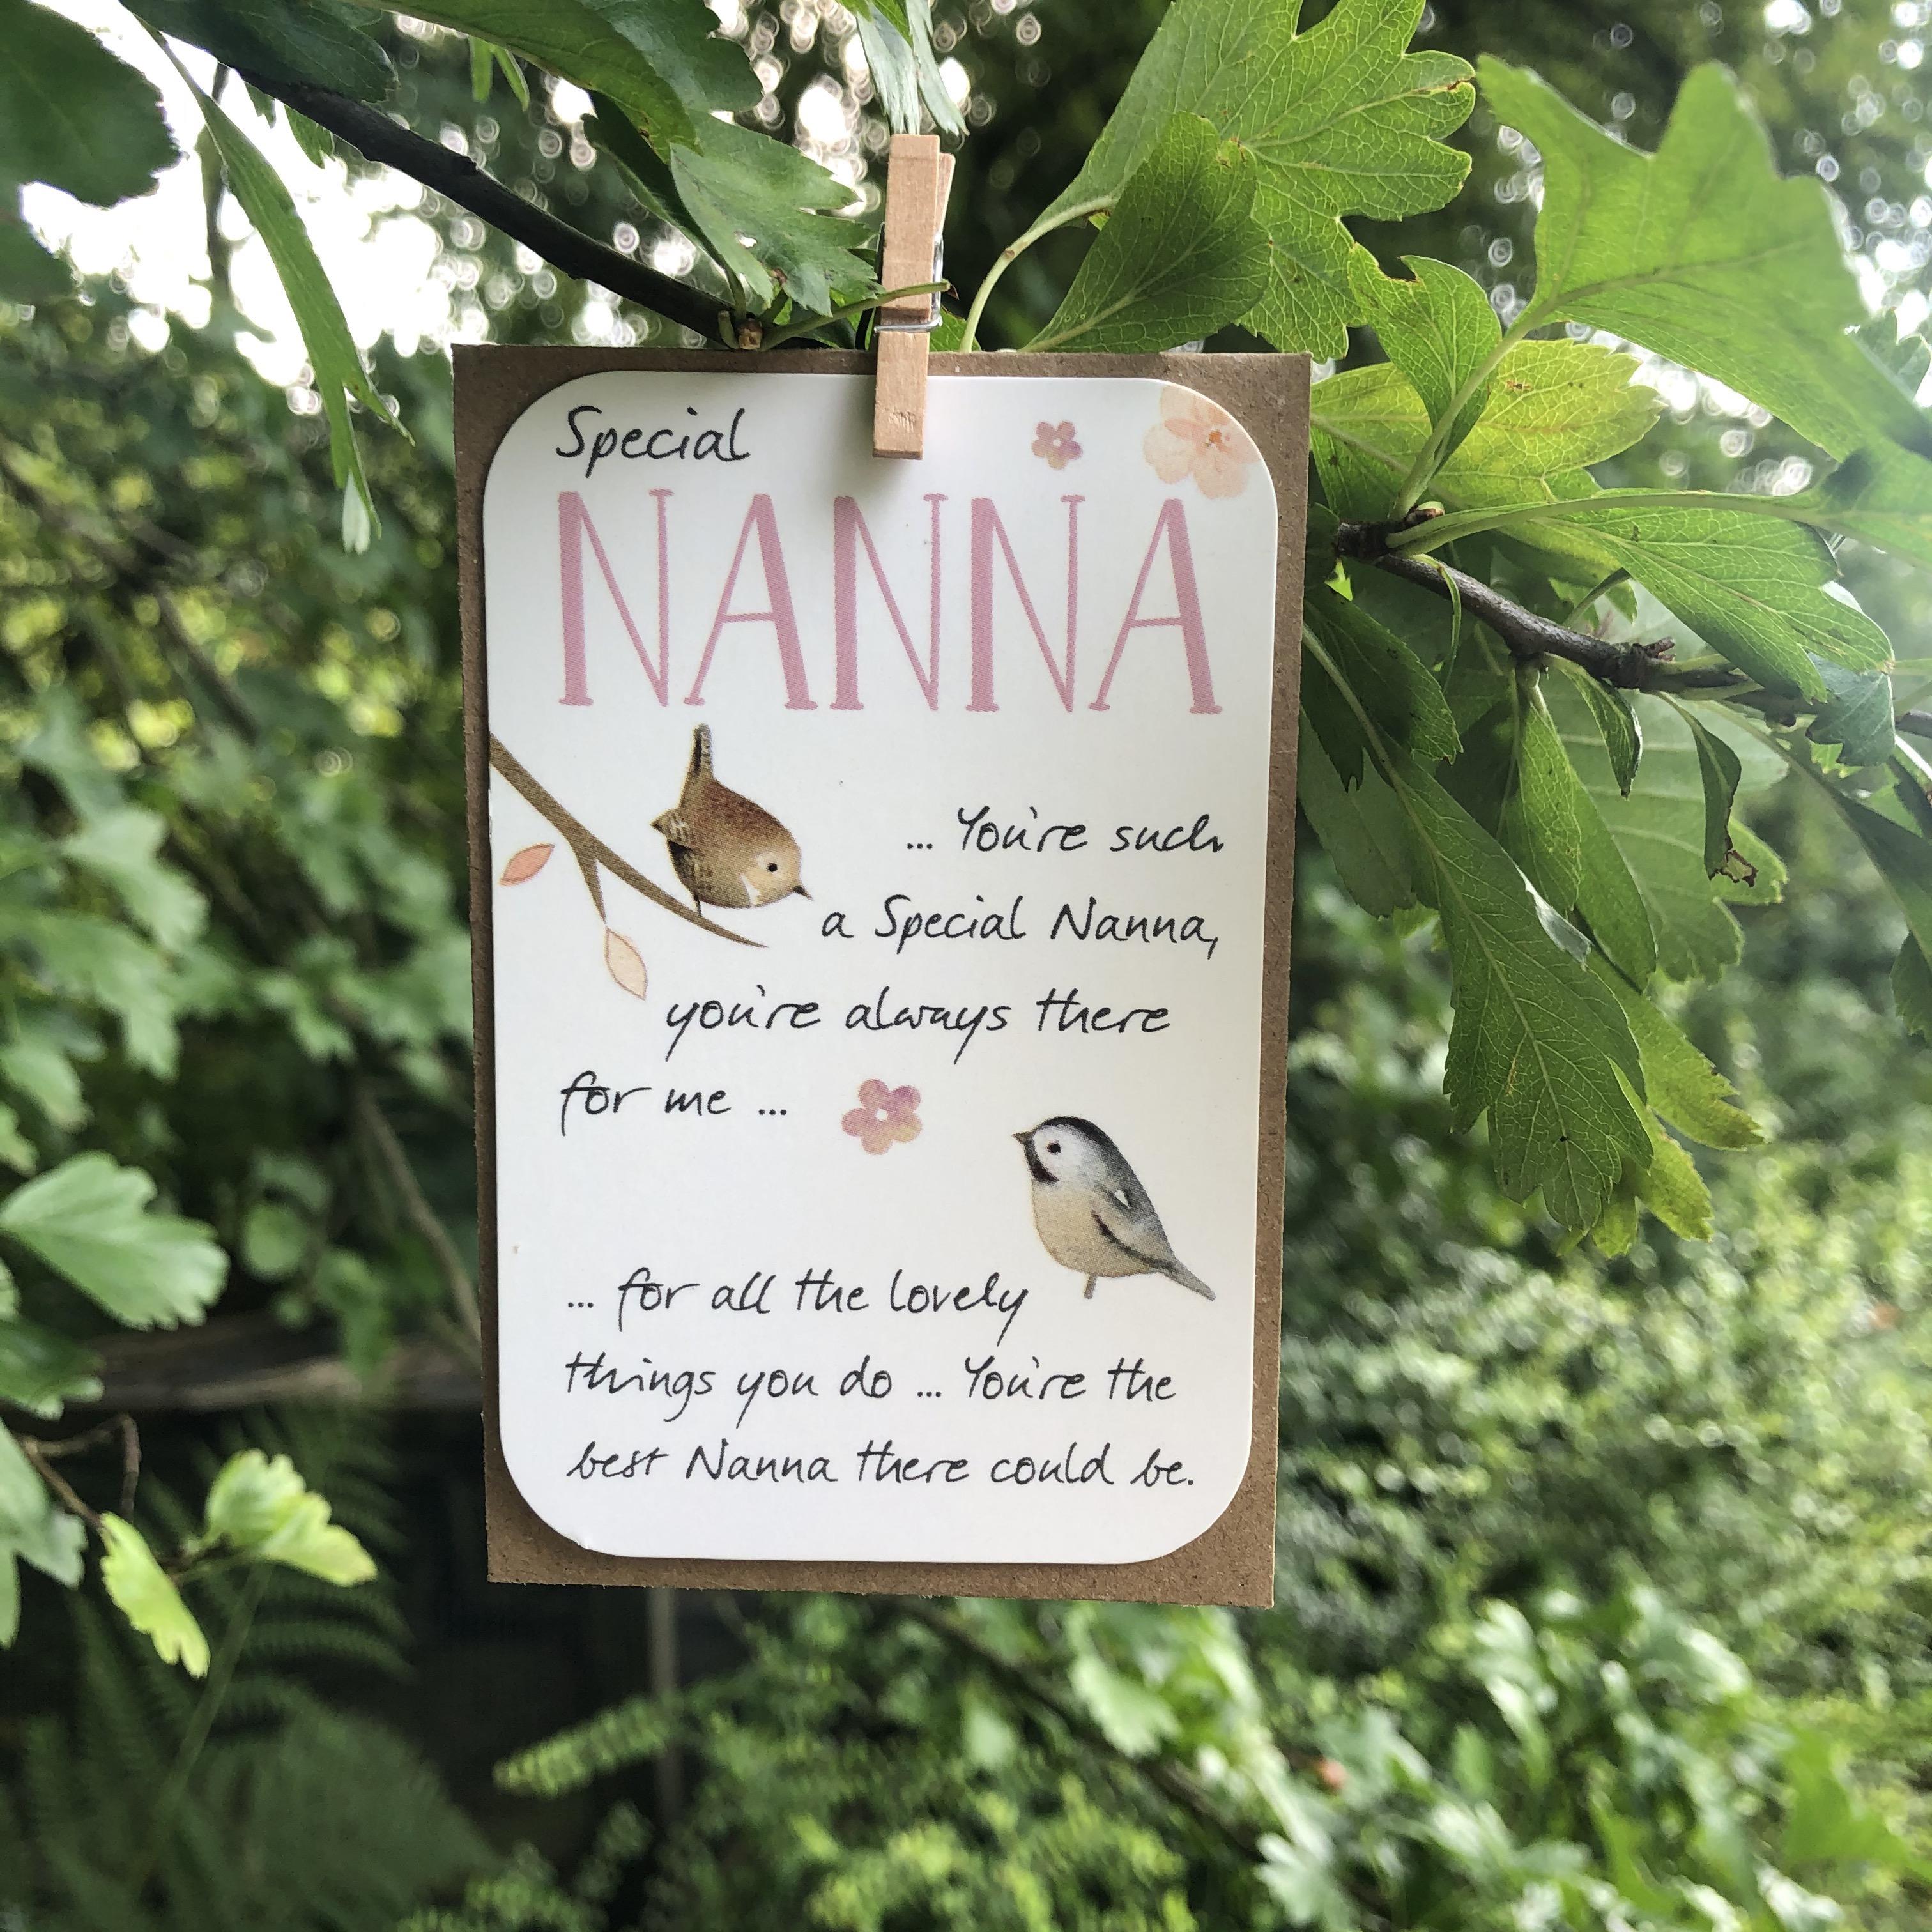 A small keepsake card with a 'Nanna' caption, and lovely little verse